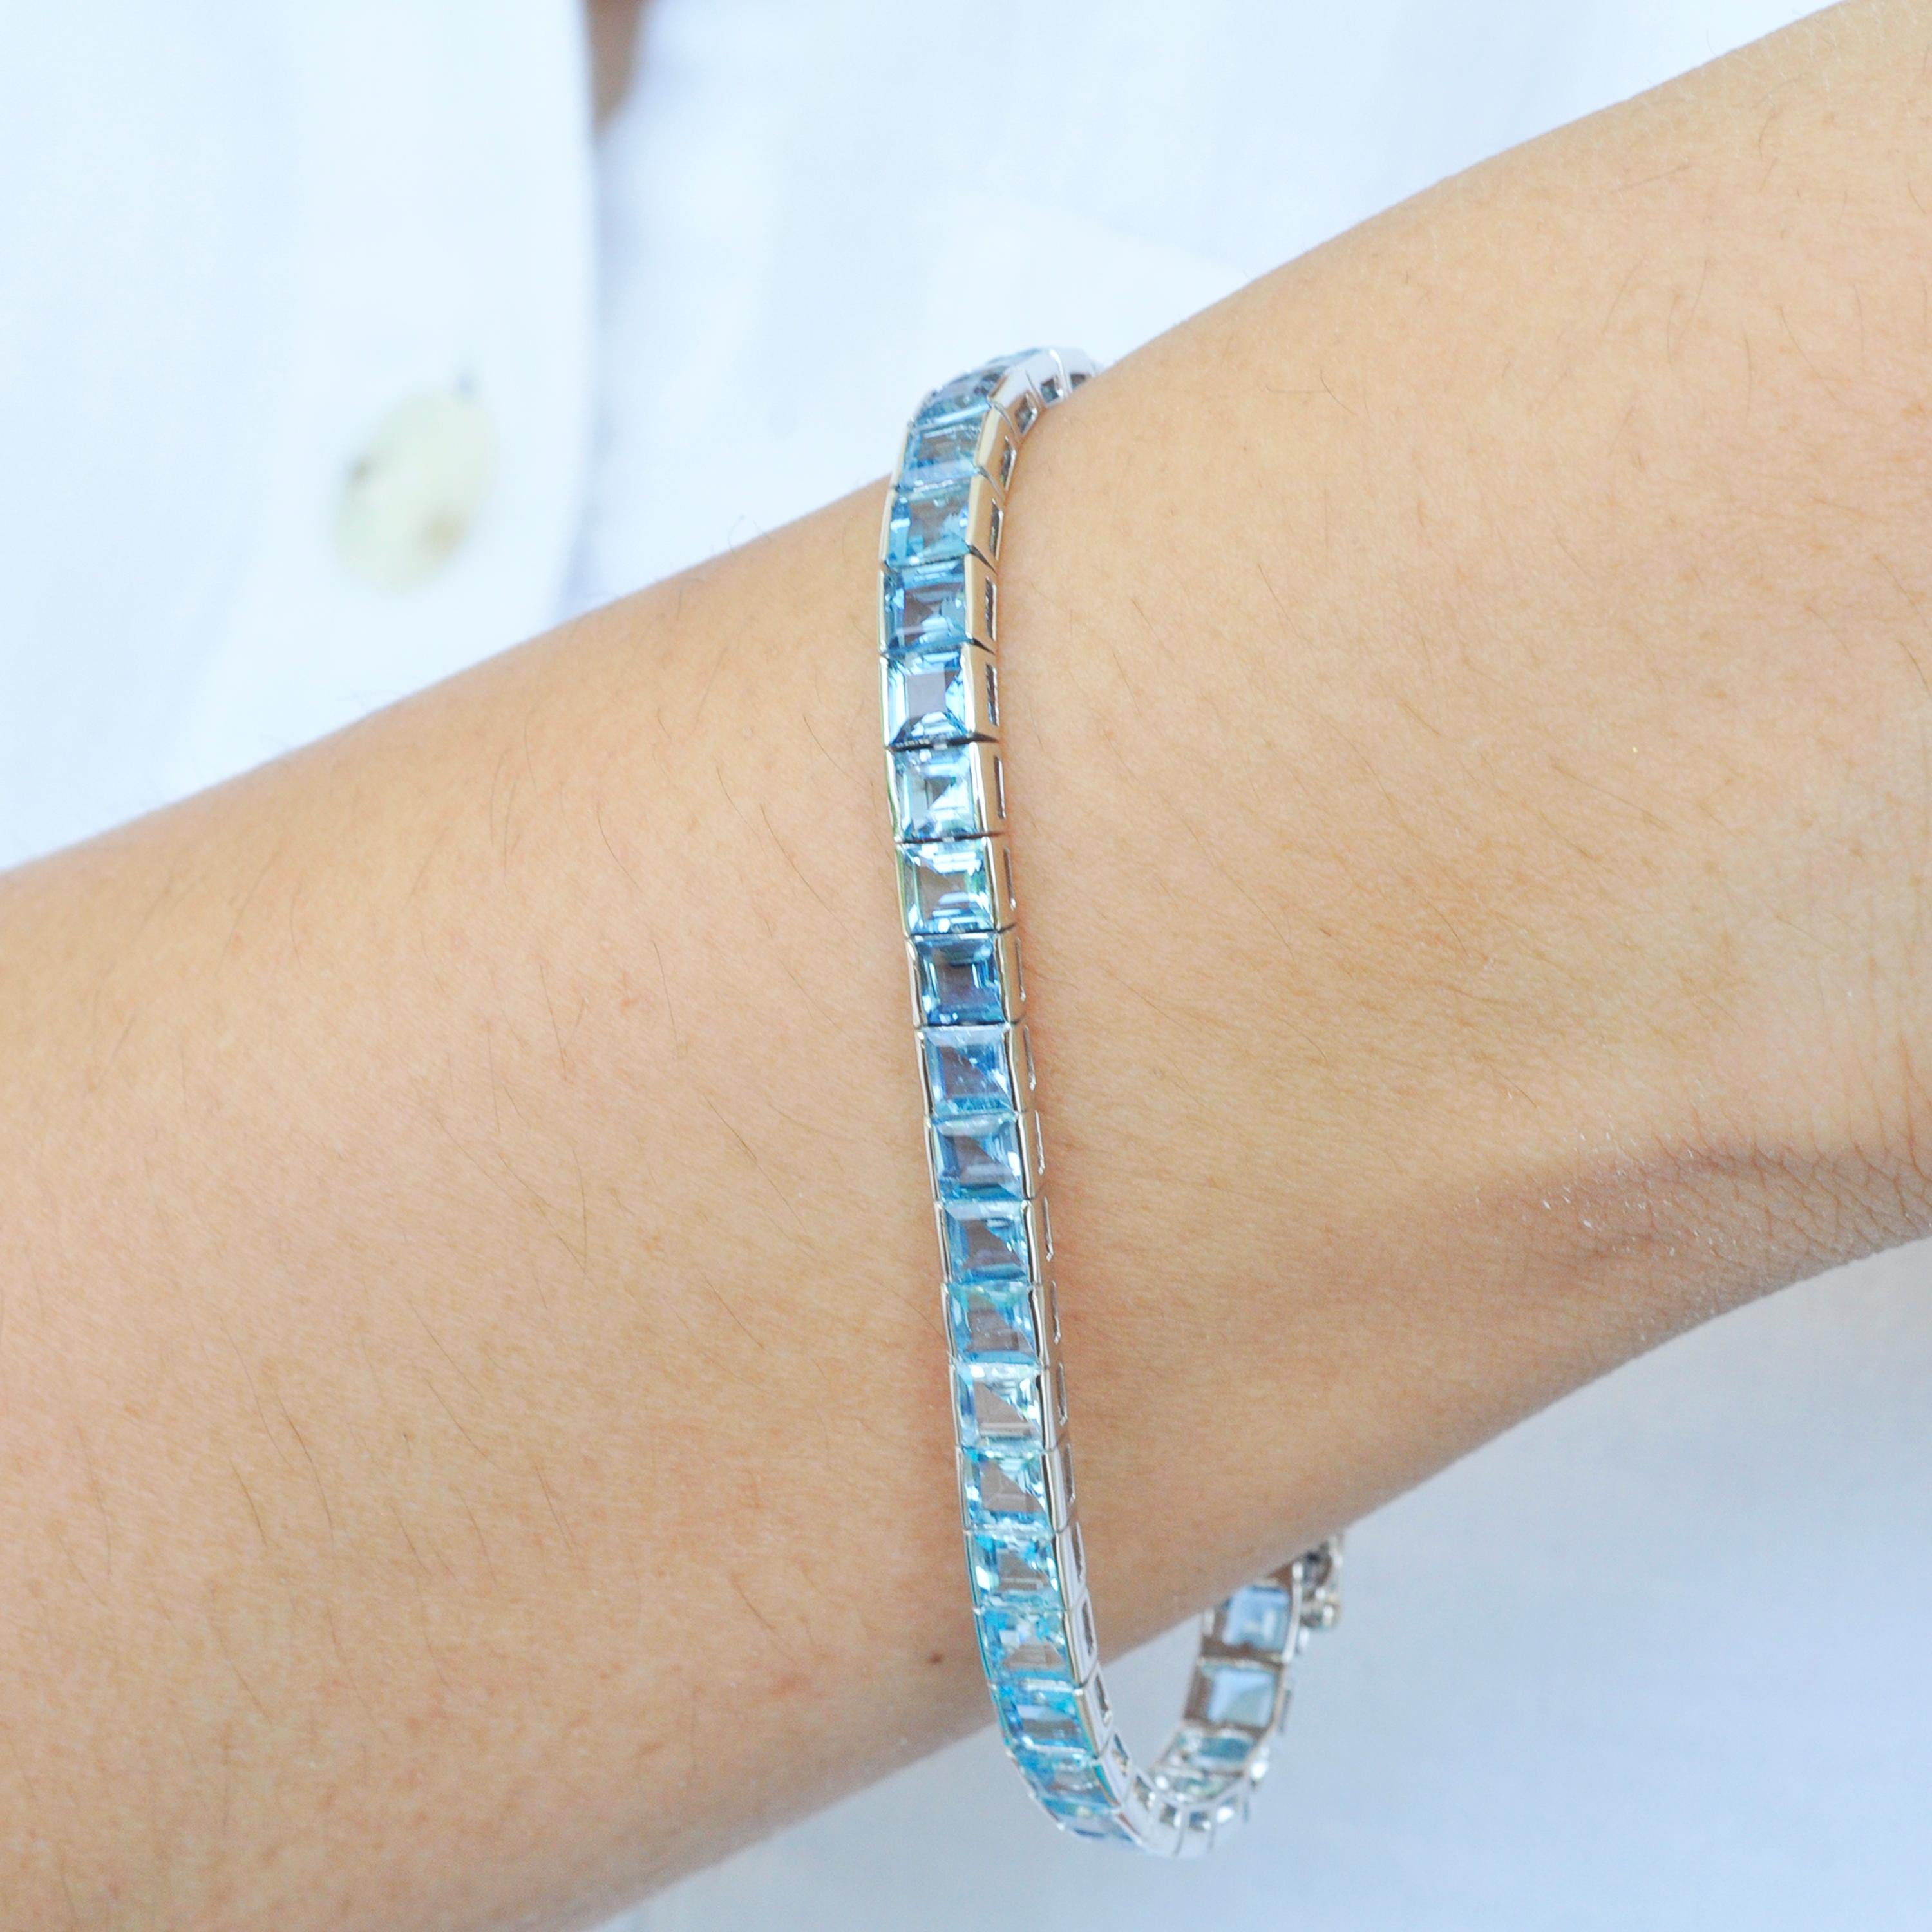 18 karat white gold natural gradient aquamarine square tennis line bracelet.

This masterful royal aquamarine tennis bracelet is superb. Lustrous 4mm aquamarines are selected for perfect hue, lustre, color and clarity and carefully aligned from dark